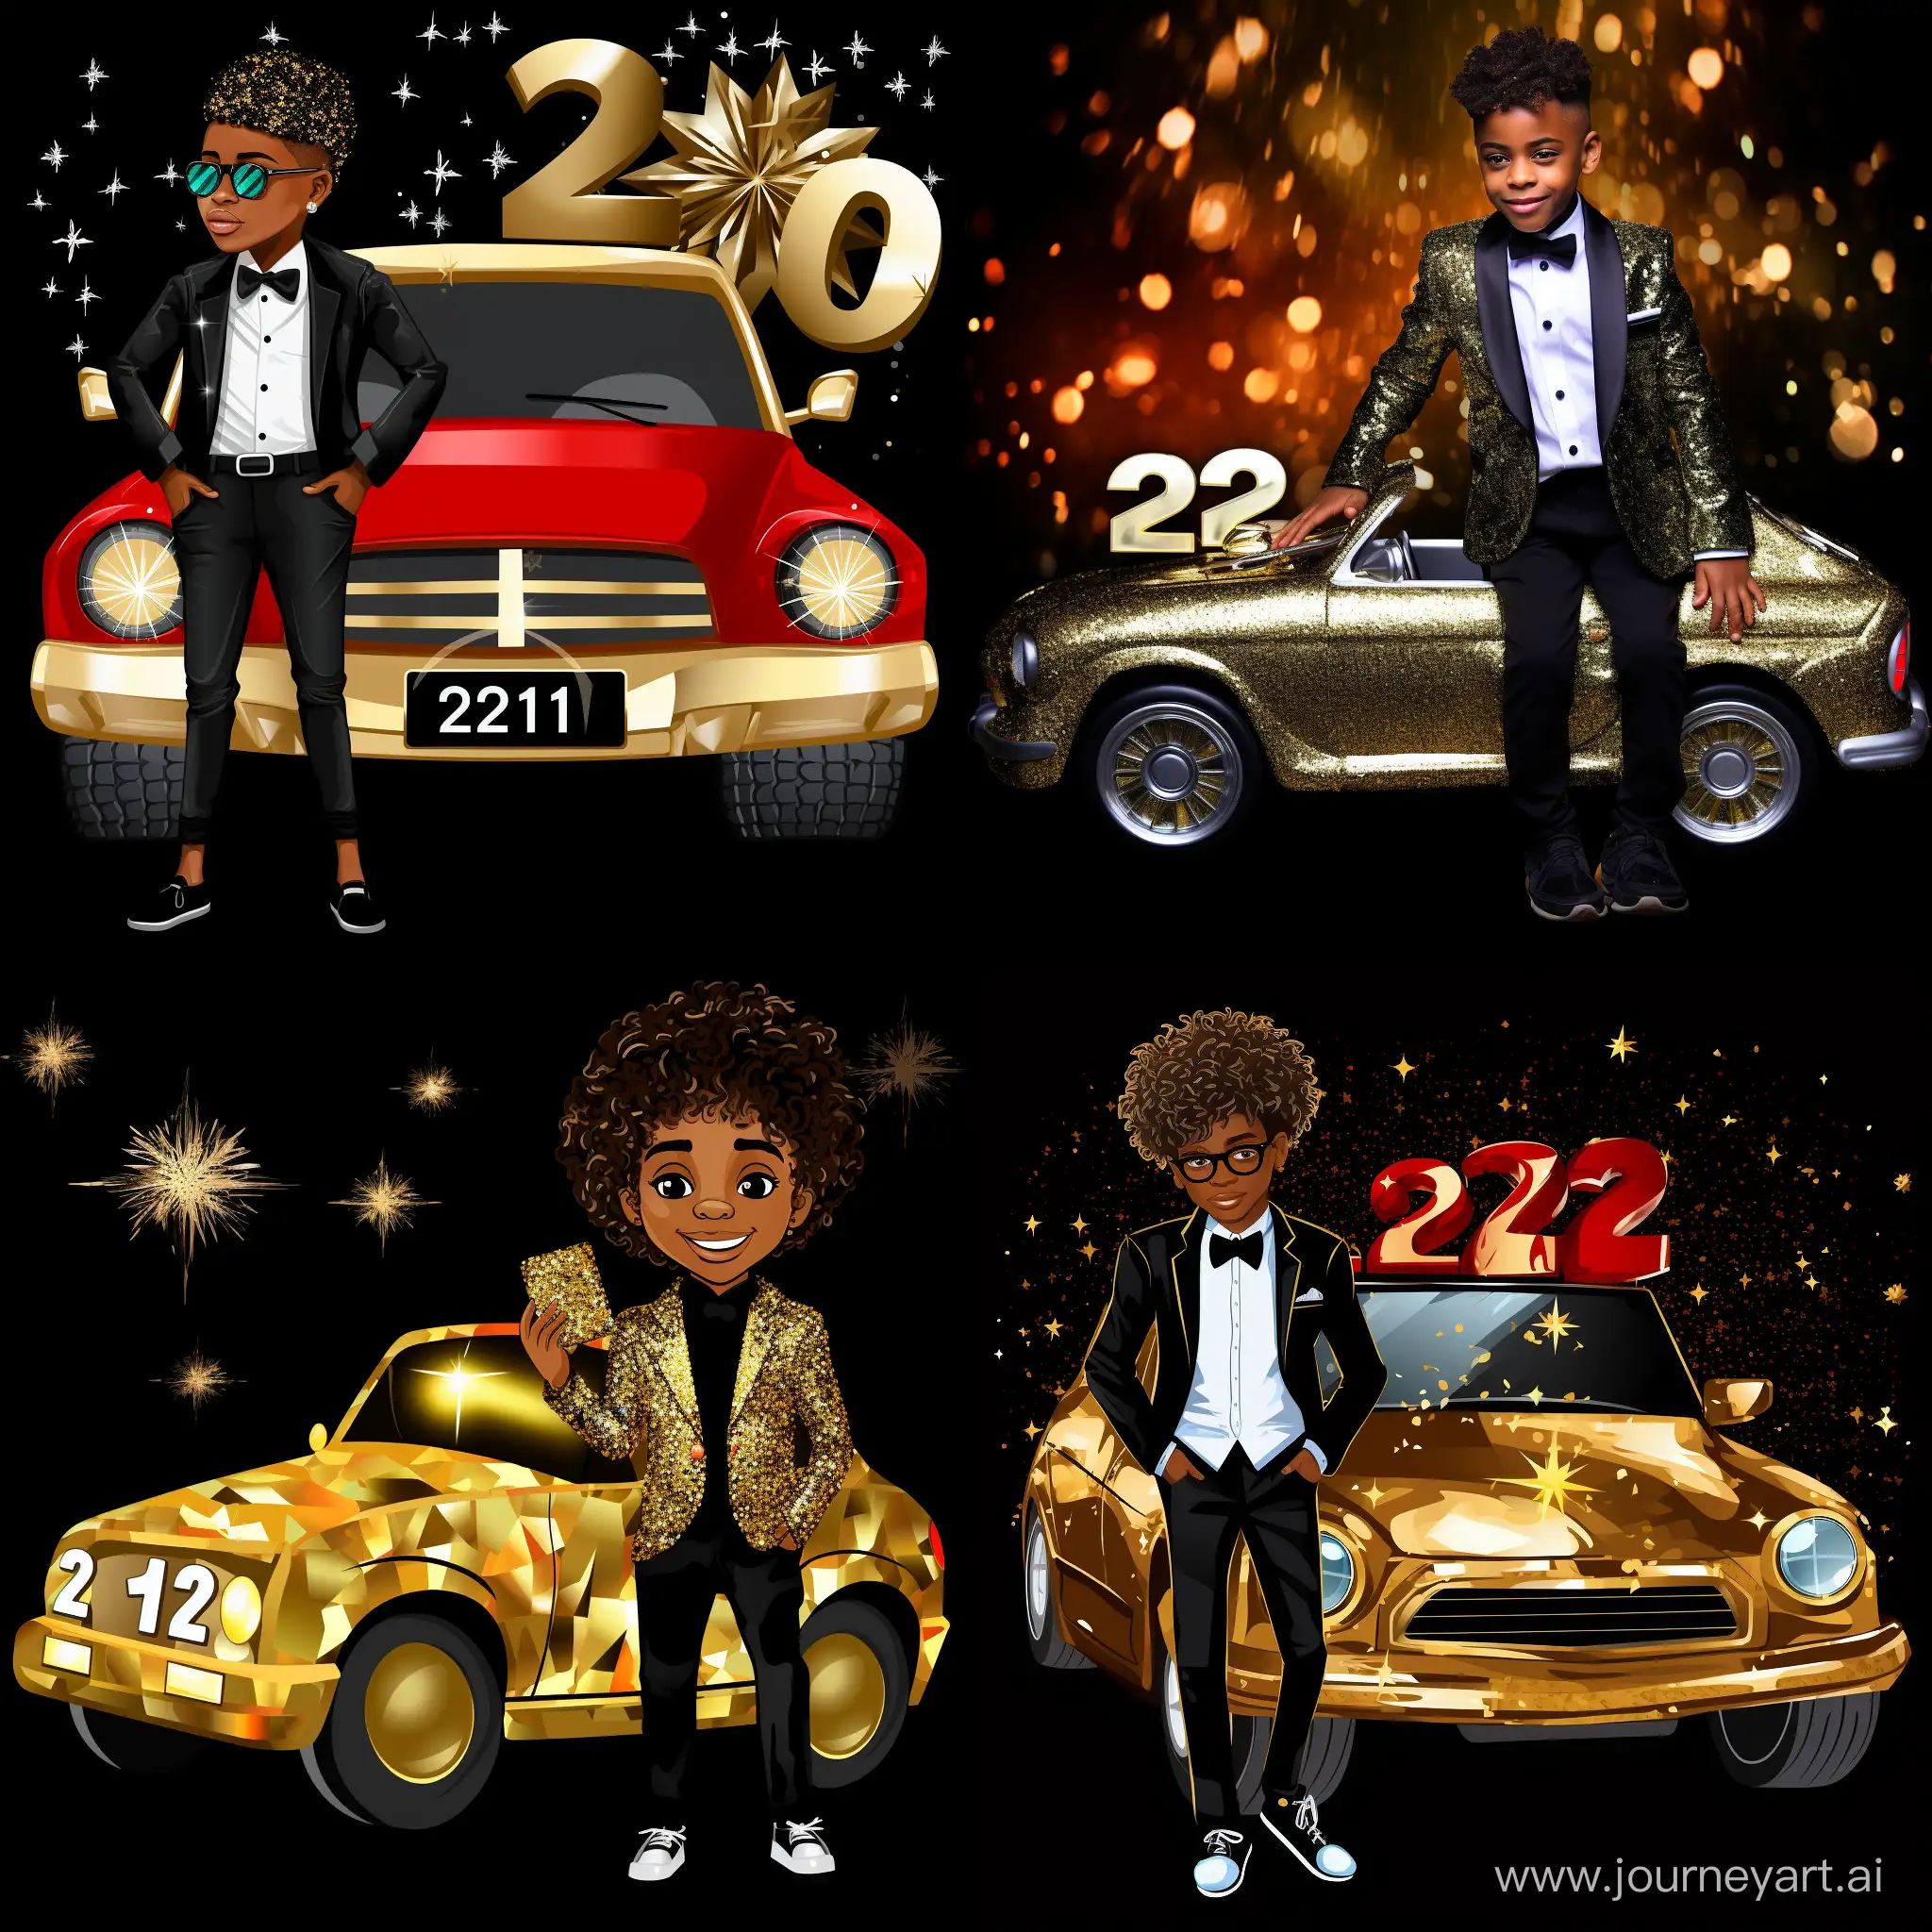 6 "an african American boy with short hair, wearing a glitter black and white suit, a gold Rolex wristwatch, gold shades, black shoes. He has a glass of wine in his hand and stands next to a Ford sports in glitter white on veer black paint, write the word 2024 on the car plate number. Write word "Happy New Year" in the background. Add fireworks in the background"